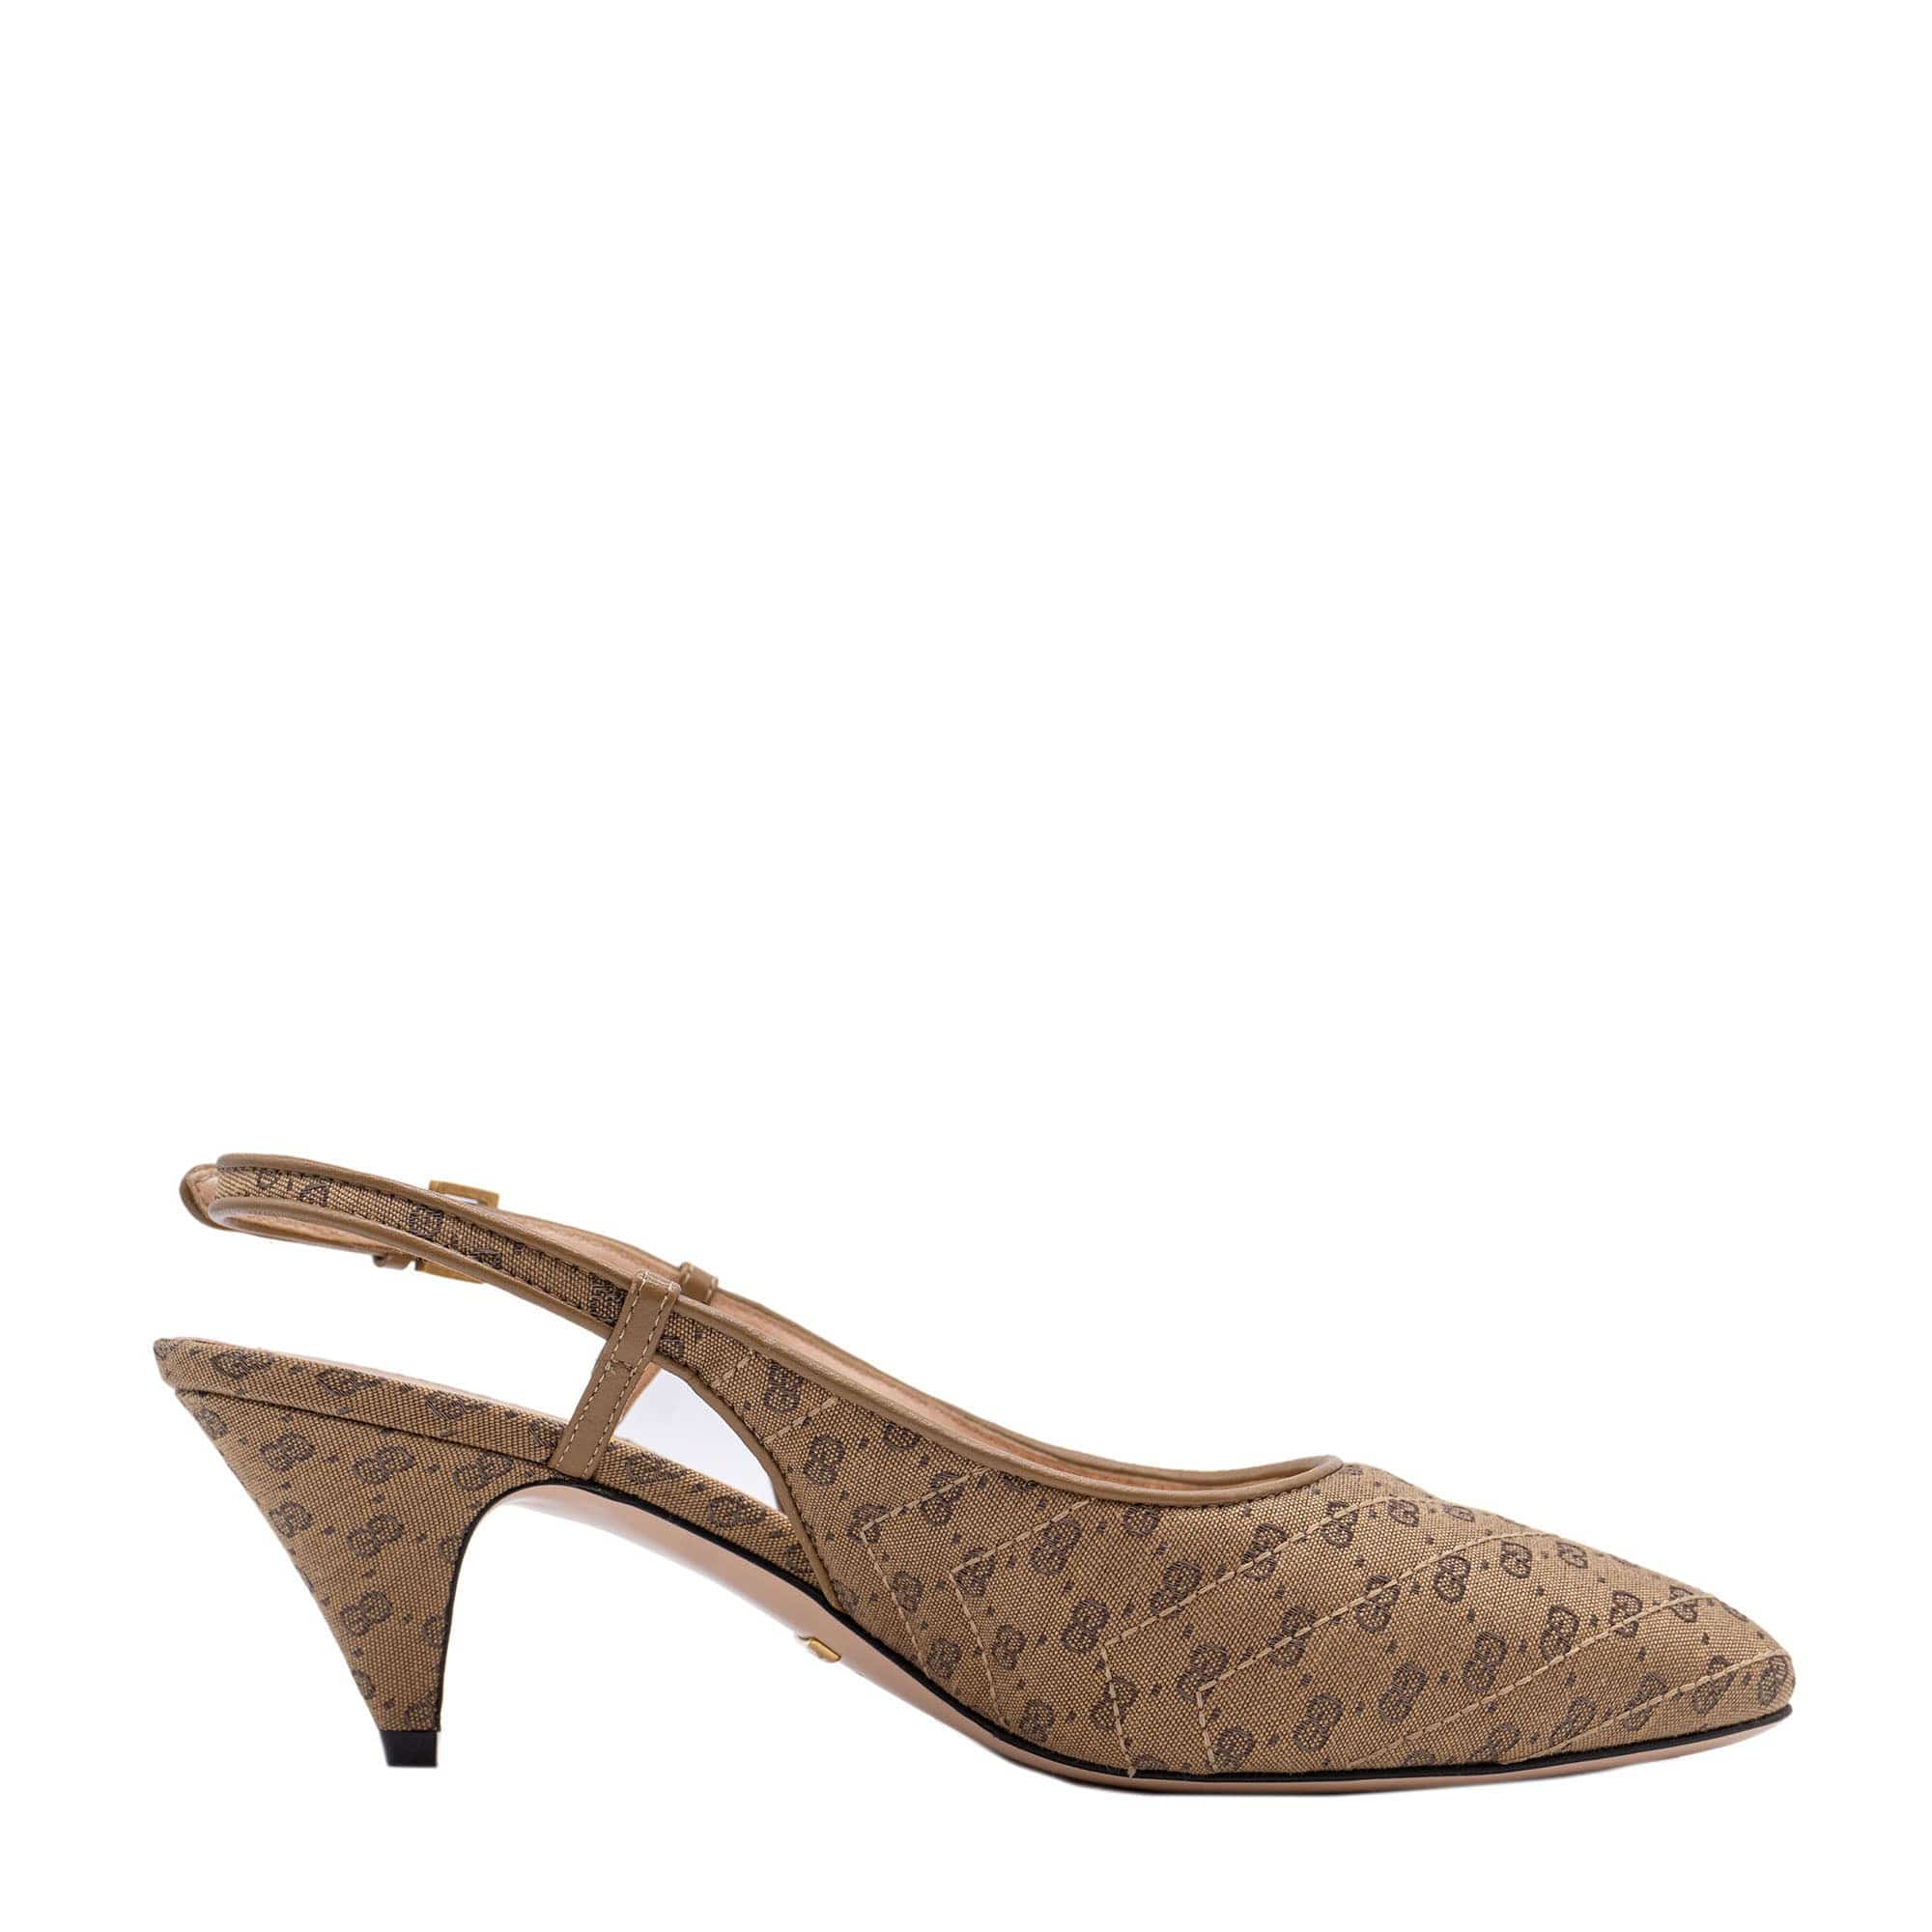 Gucci Brown GG Monogram Canvas Slingback Pumps 36.5 SYCH080